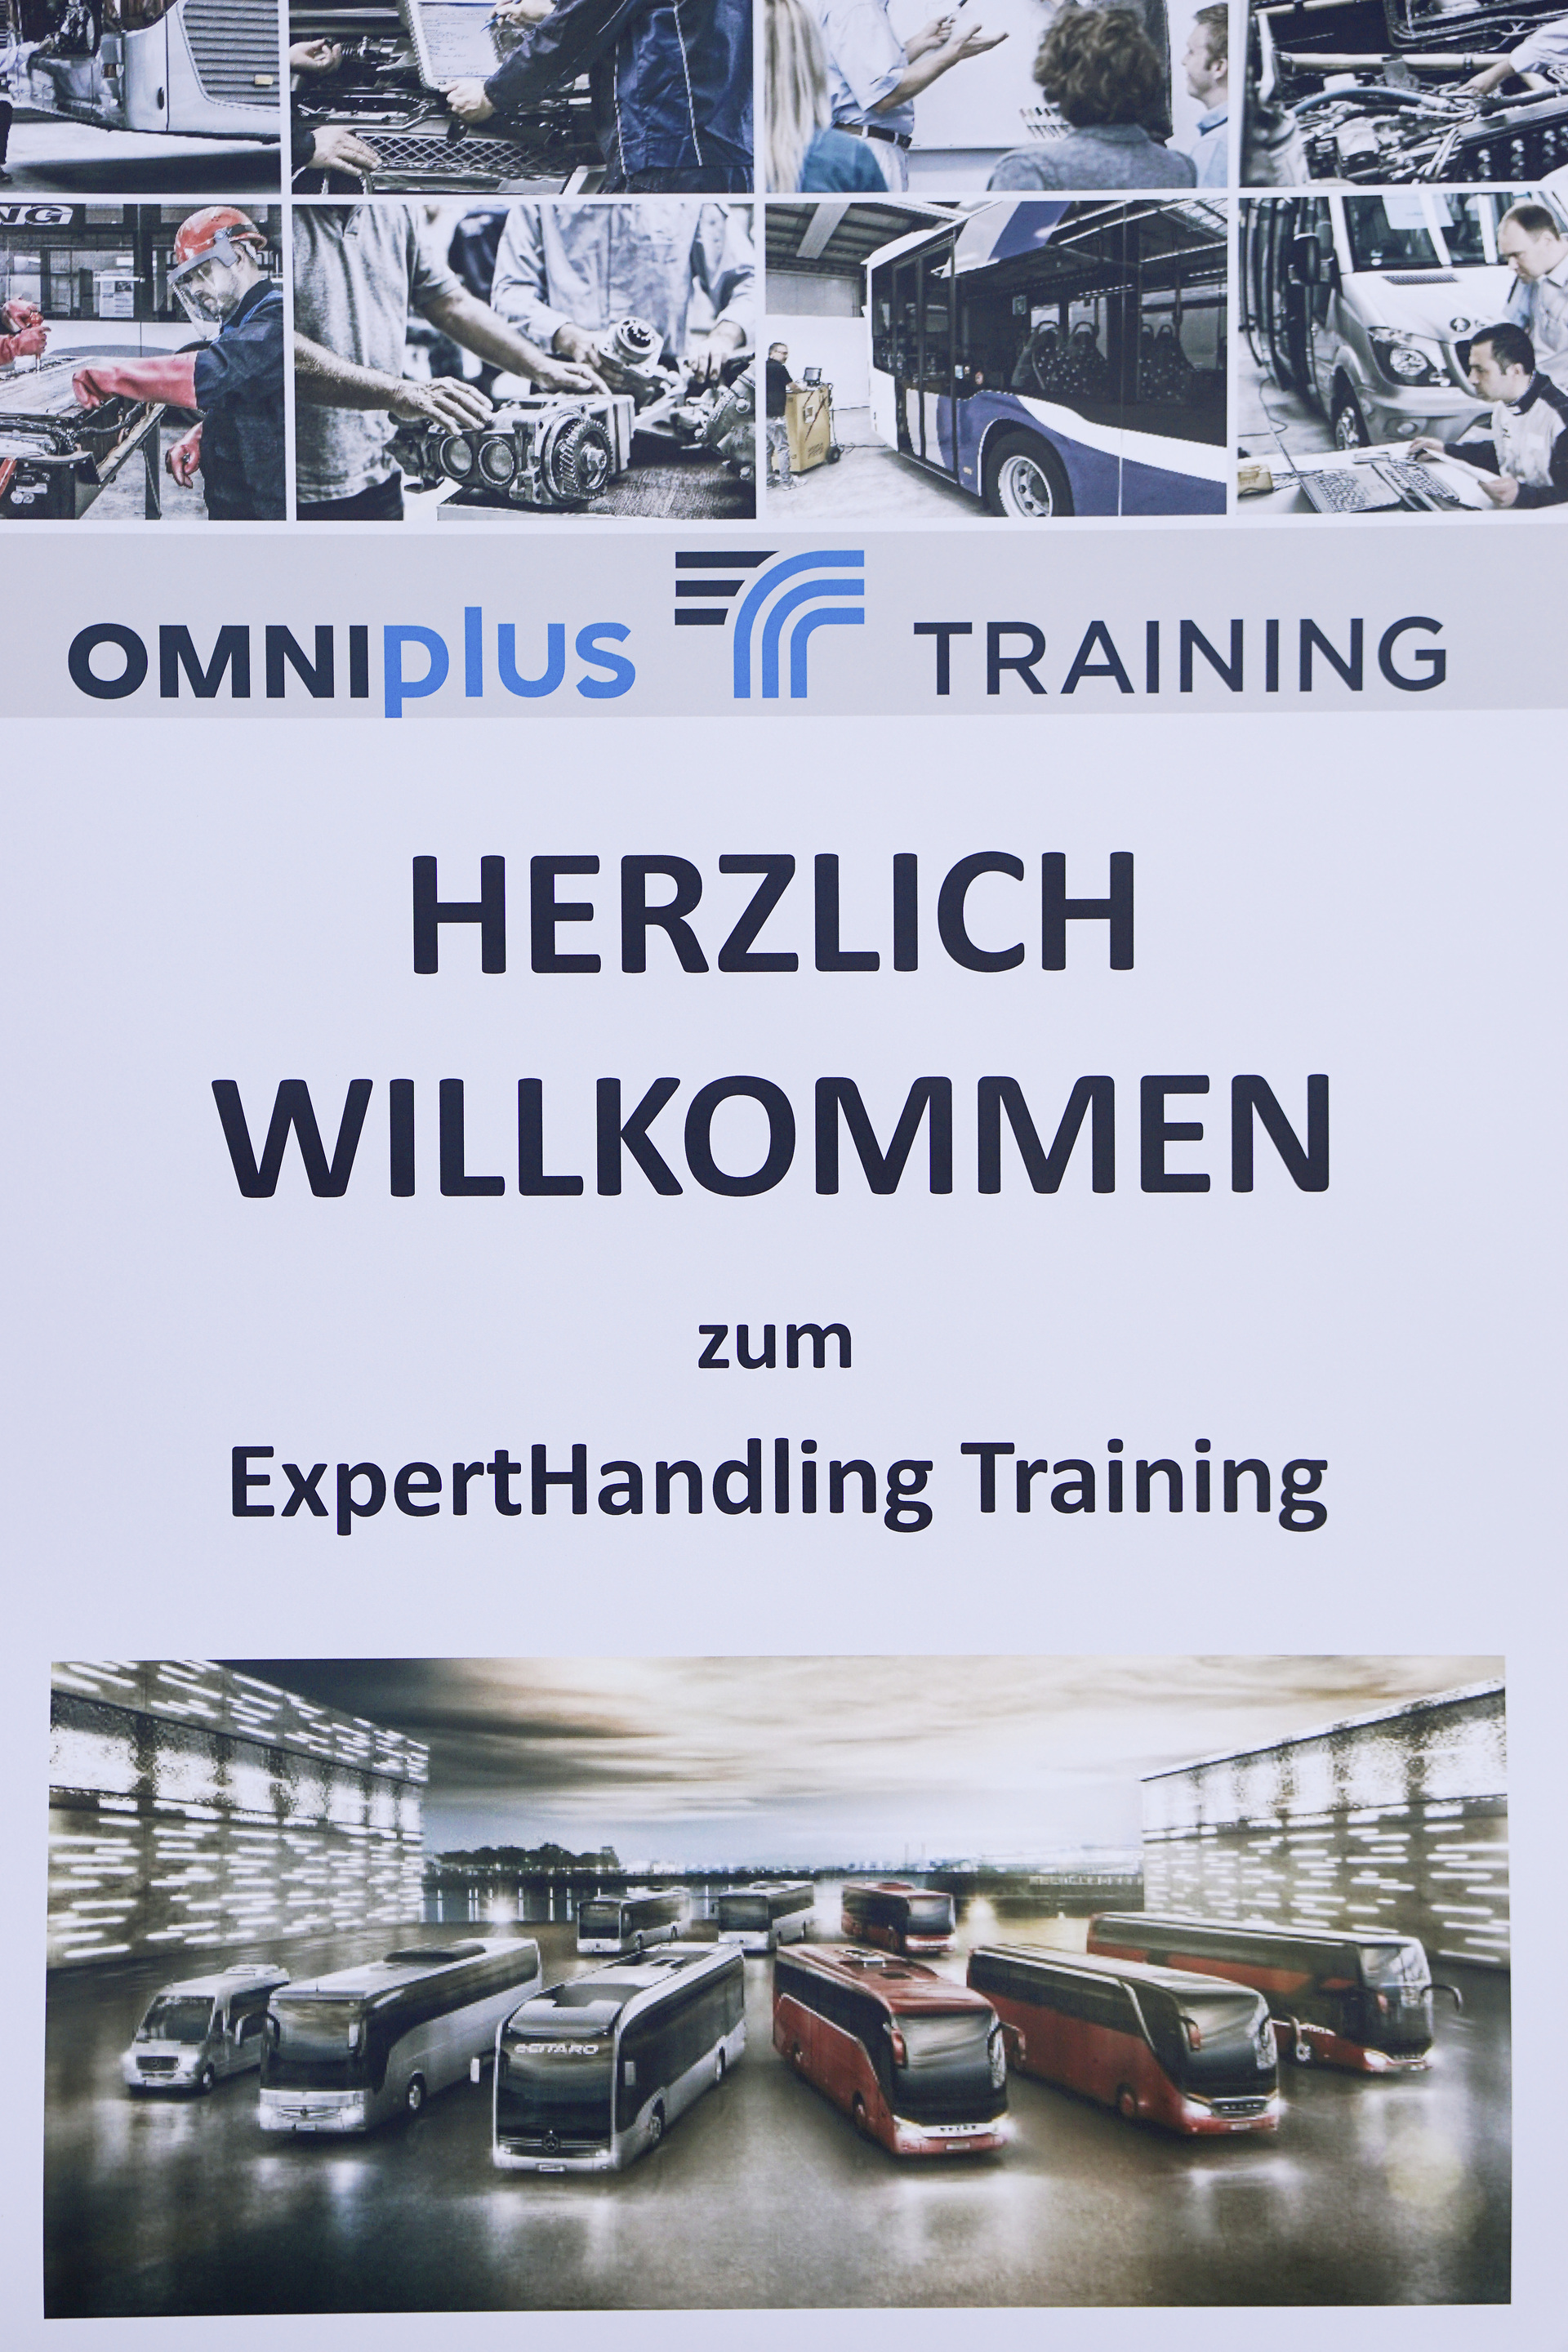 When professionals become experts: Expert Handling Training for bus and touring coach drivers from Omniplus